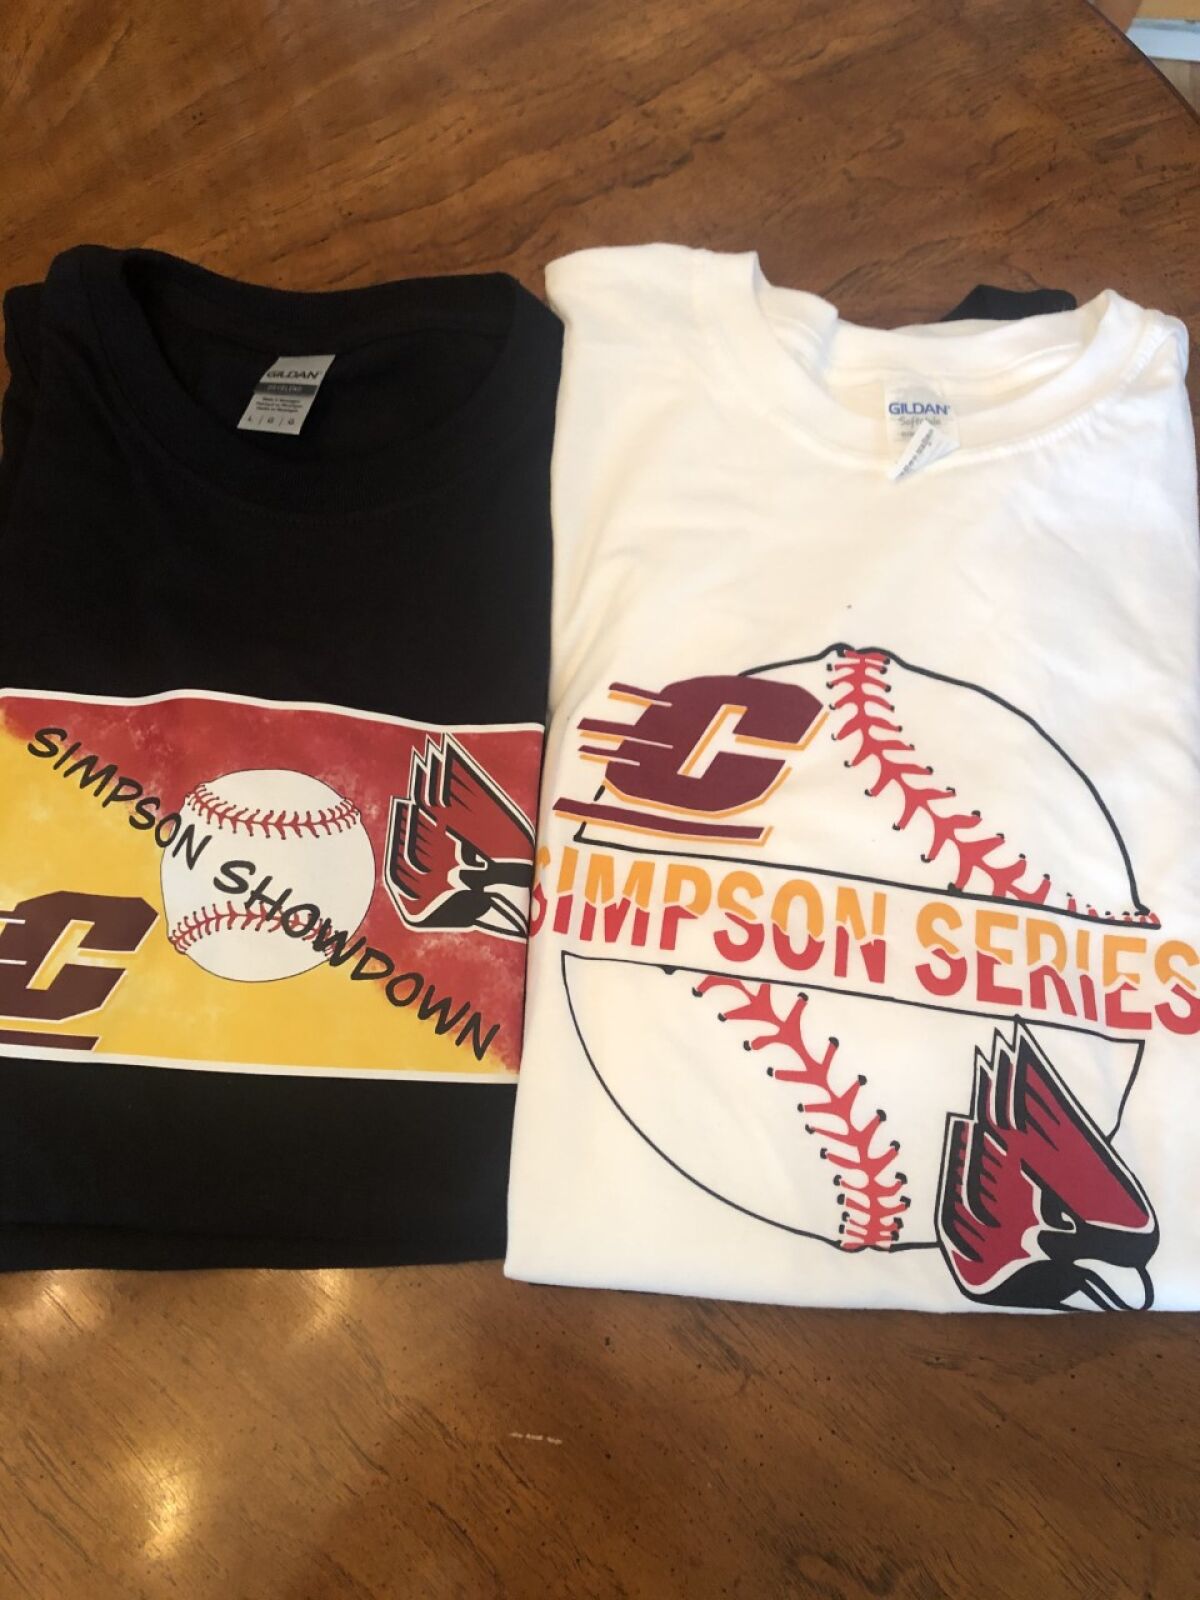 T-shirts made for the Simpson brothers showdown involving Central Michigan and Ball State.